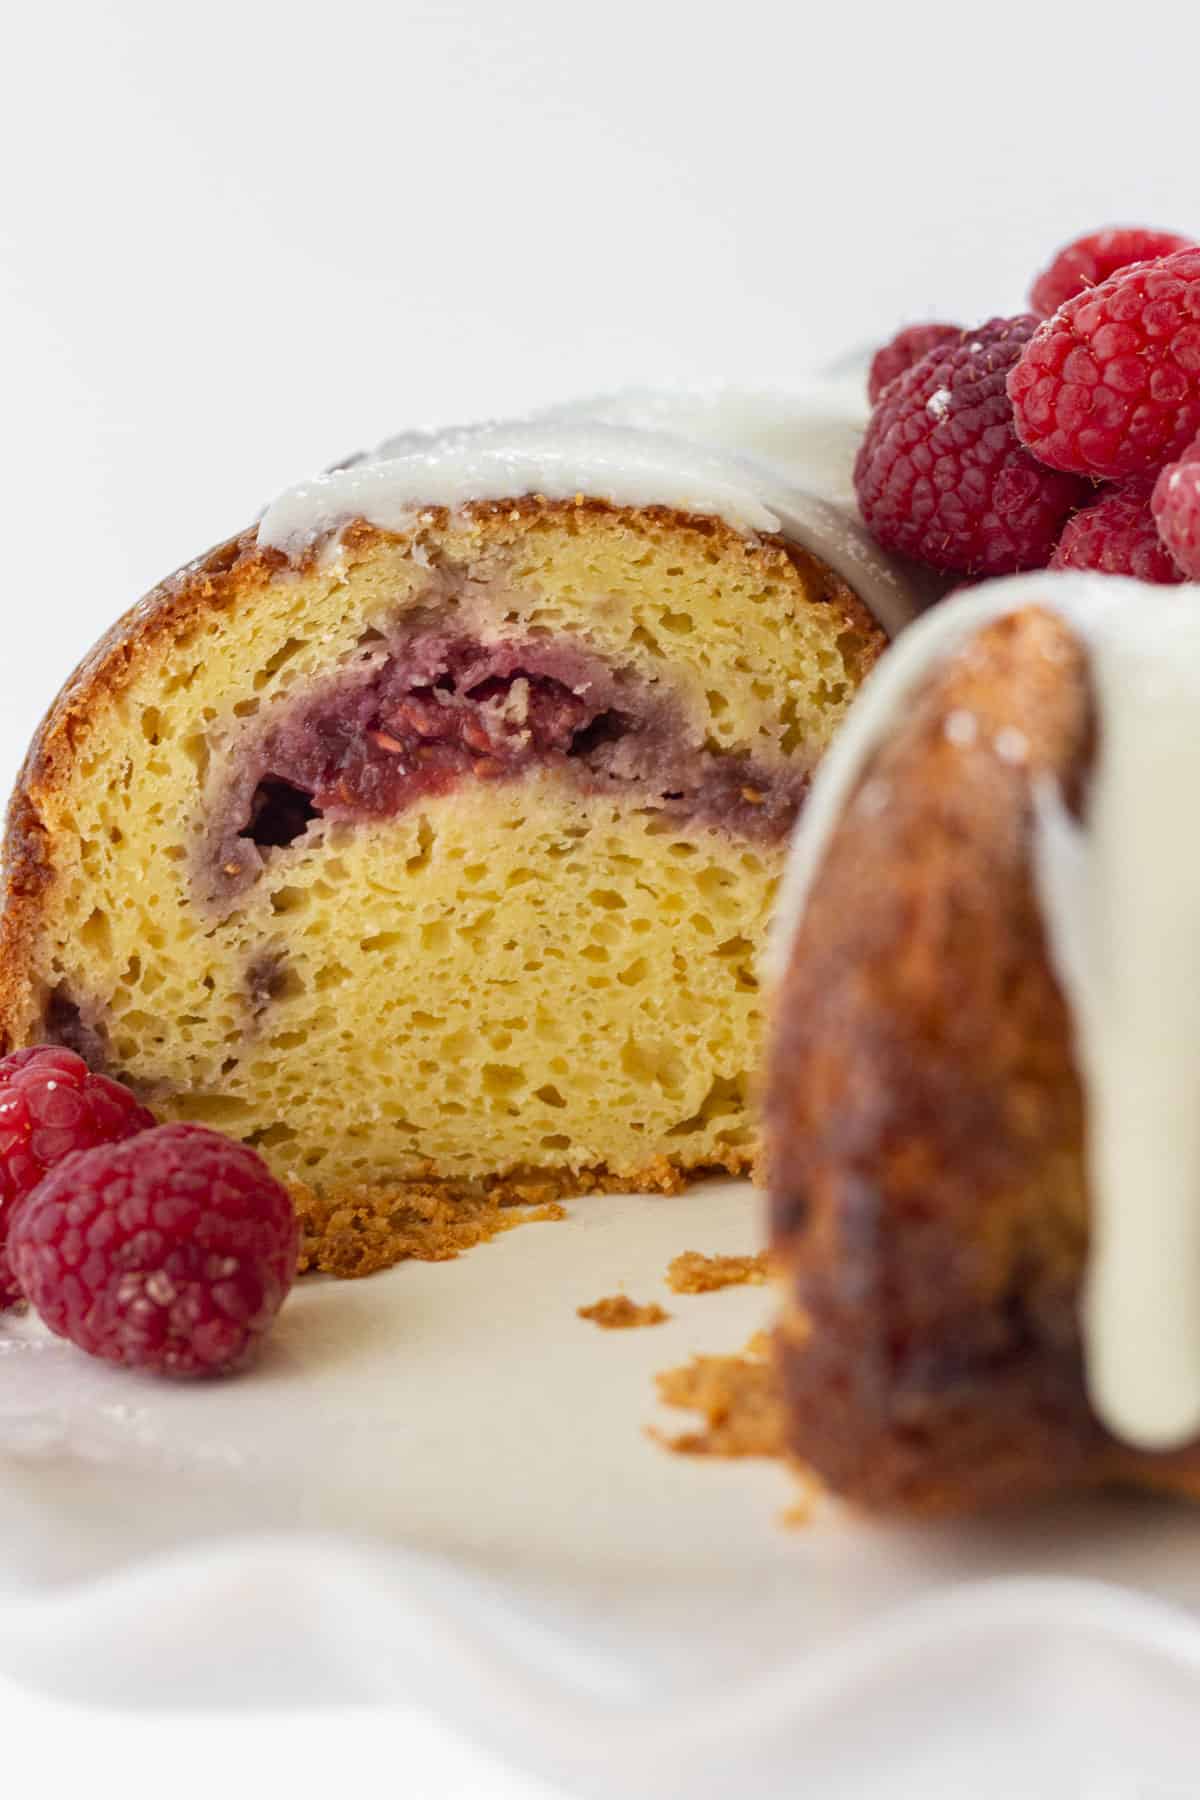 Looking in the inside of a white chocolate raspberry cake with raspberry filling.